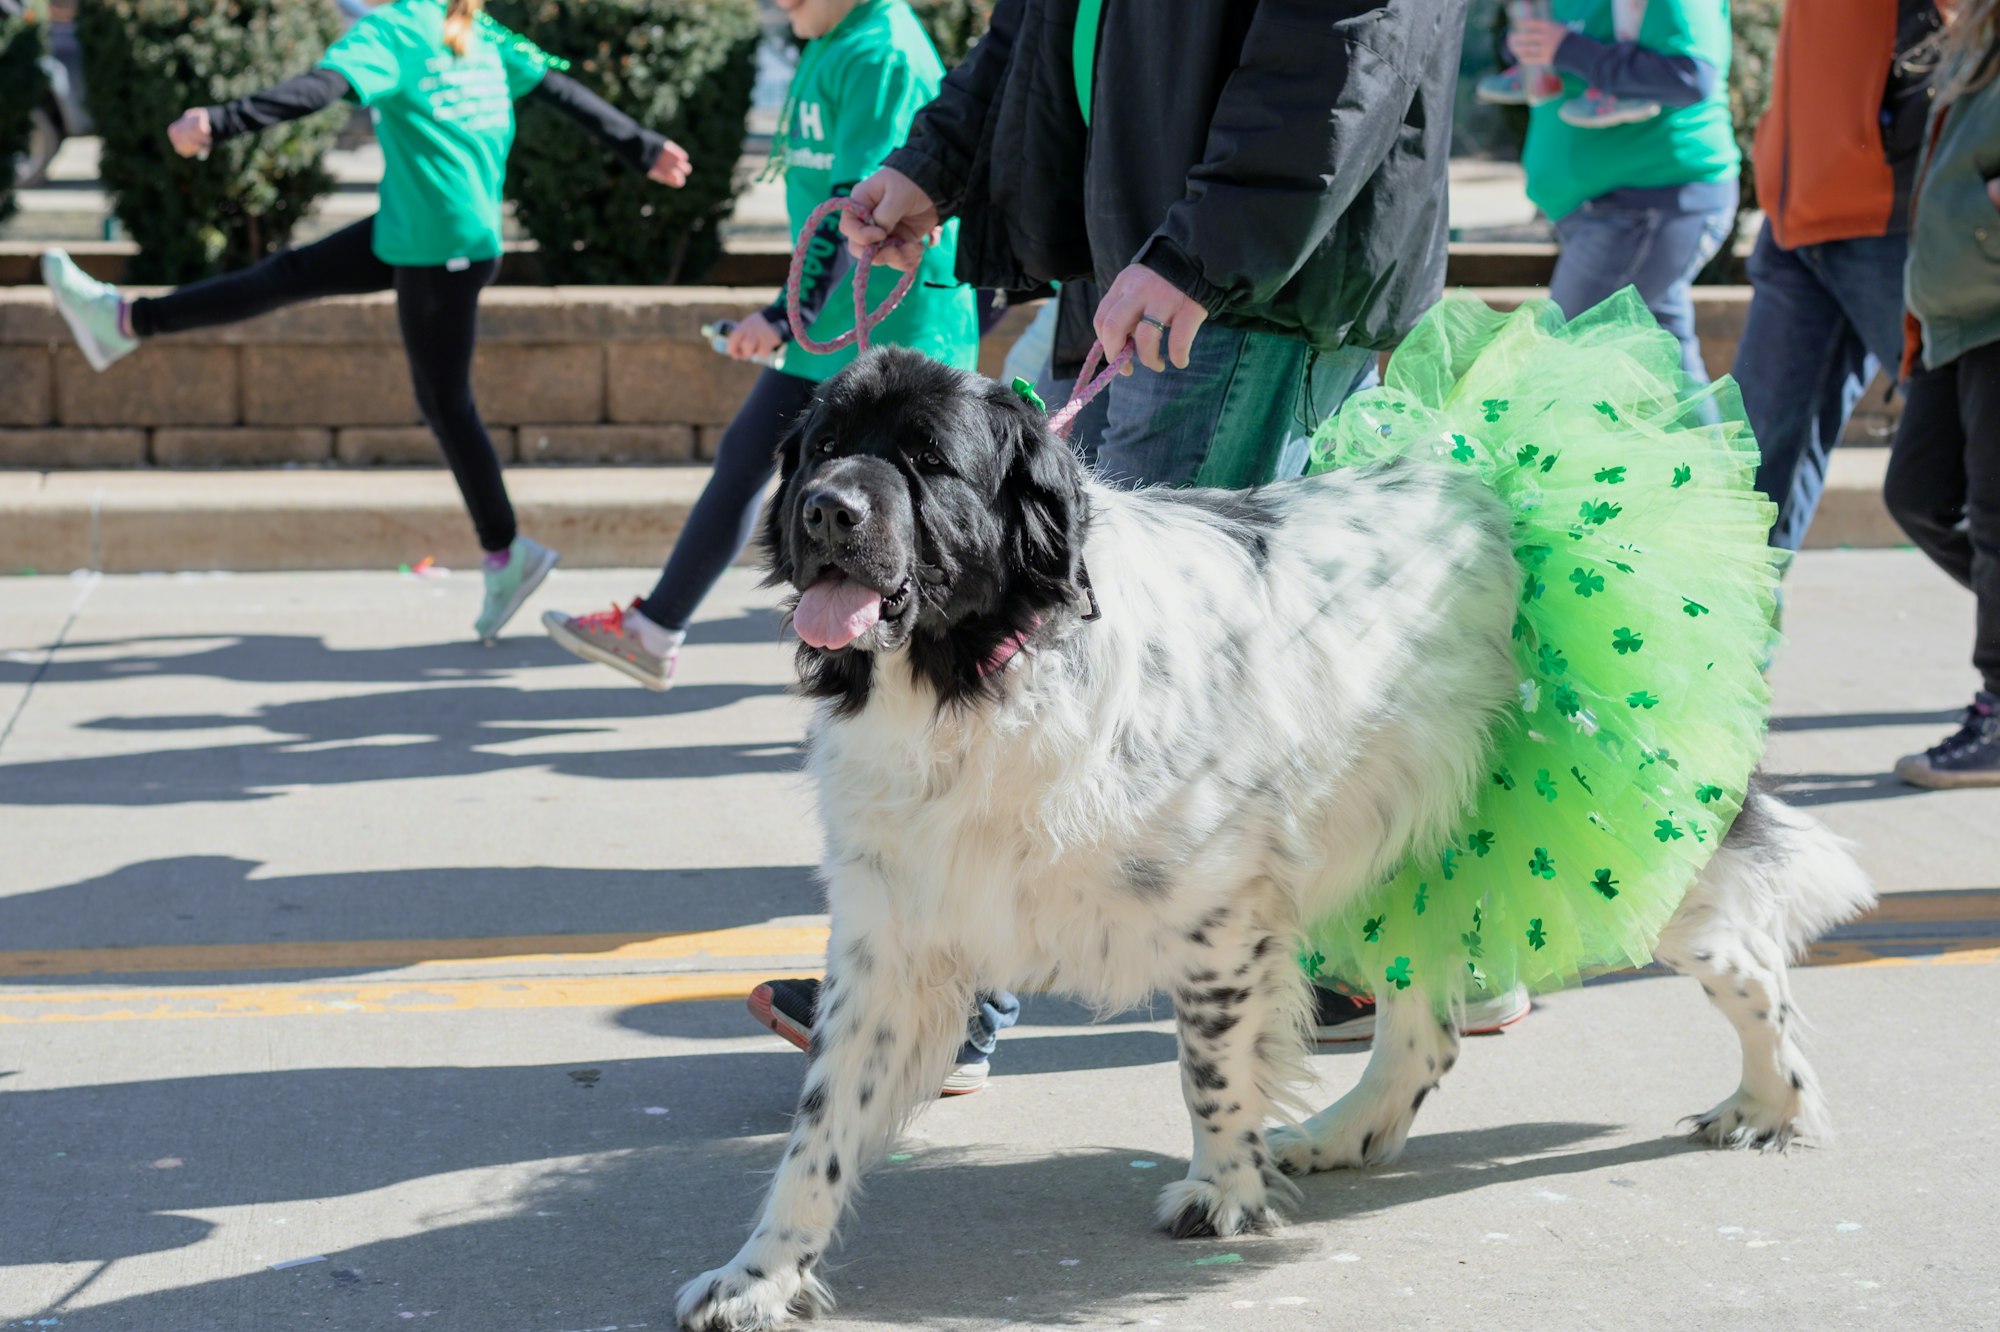 Dog dressed up in green tutu for St. Patrick’s Day parade